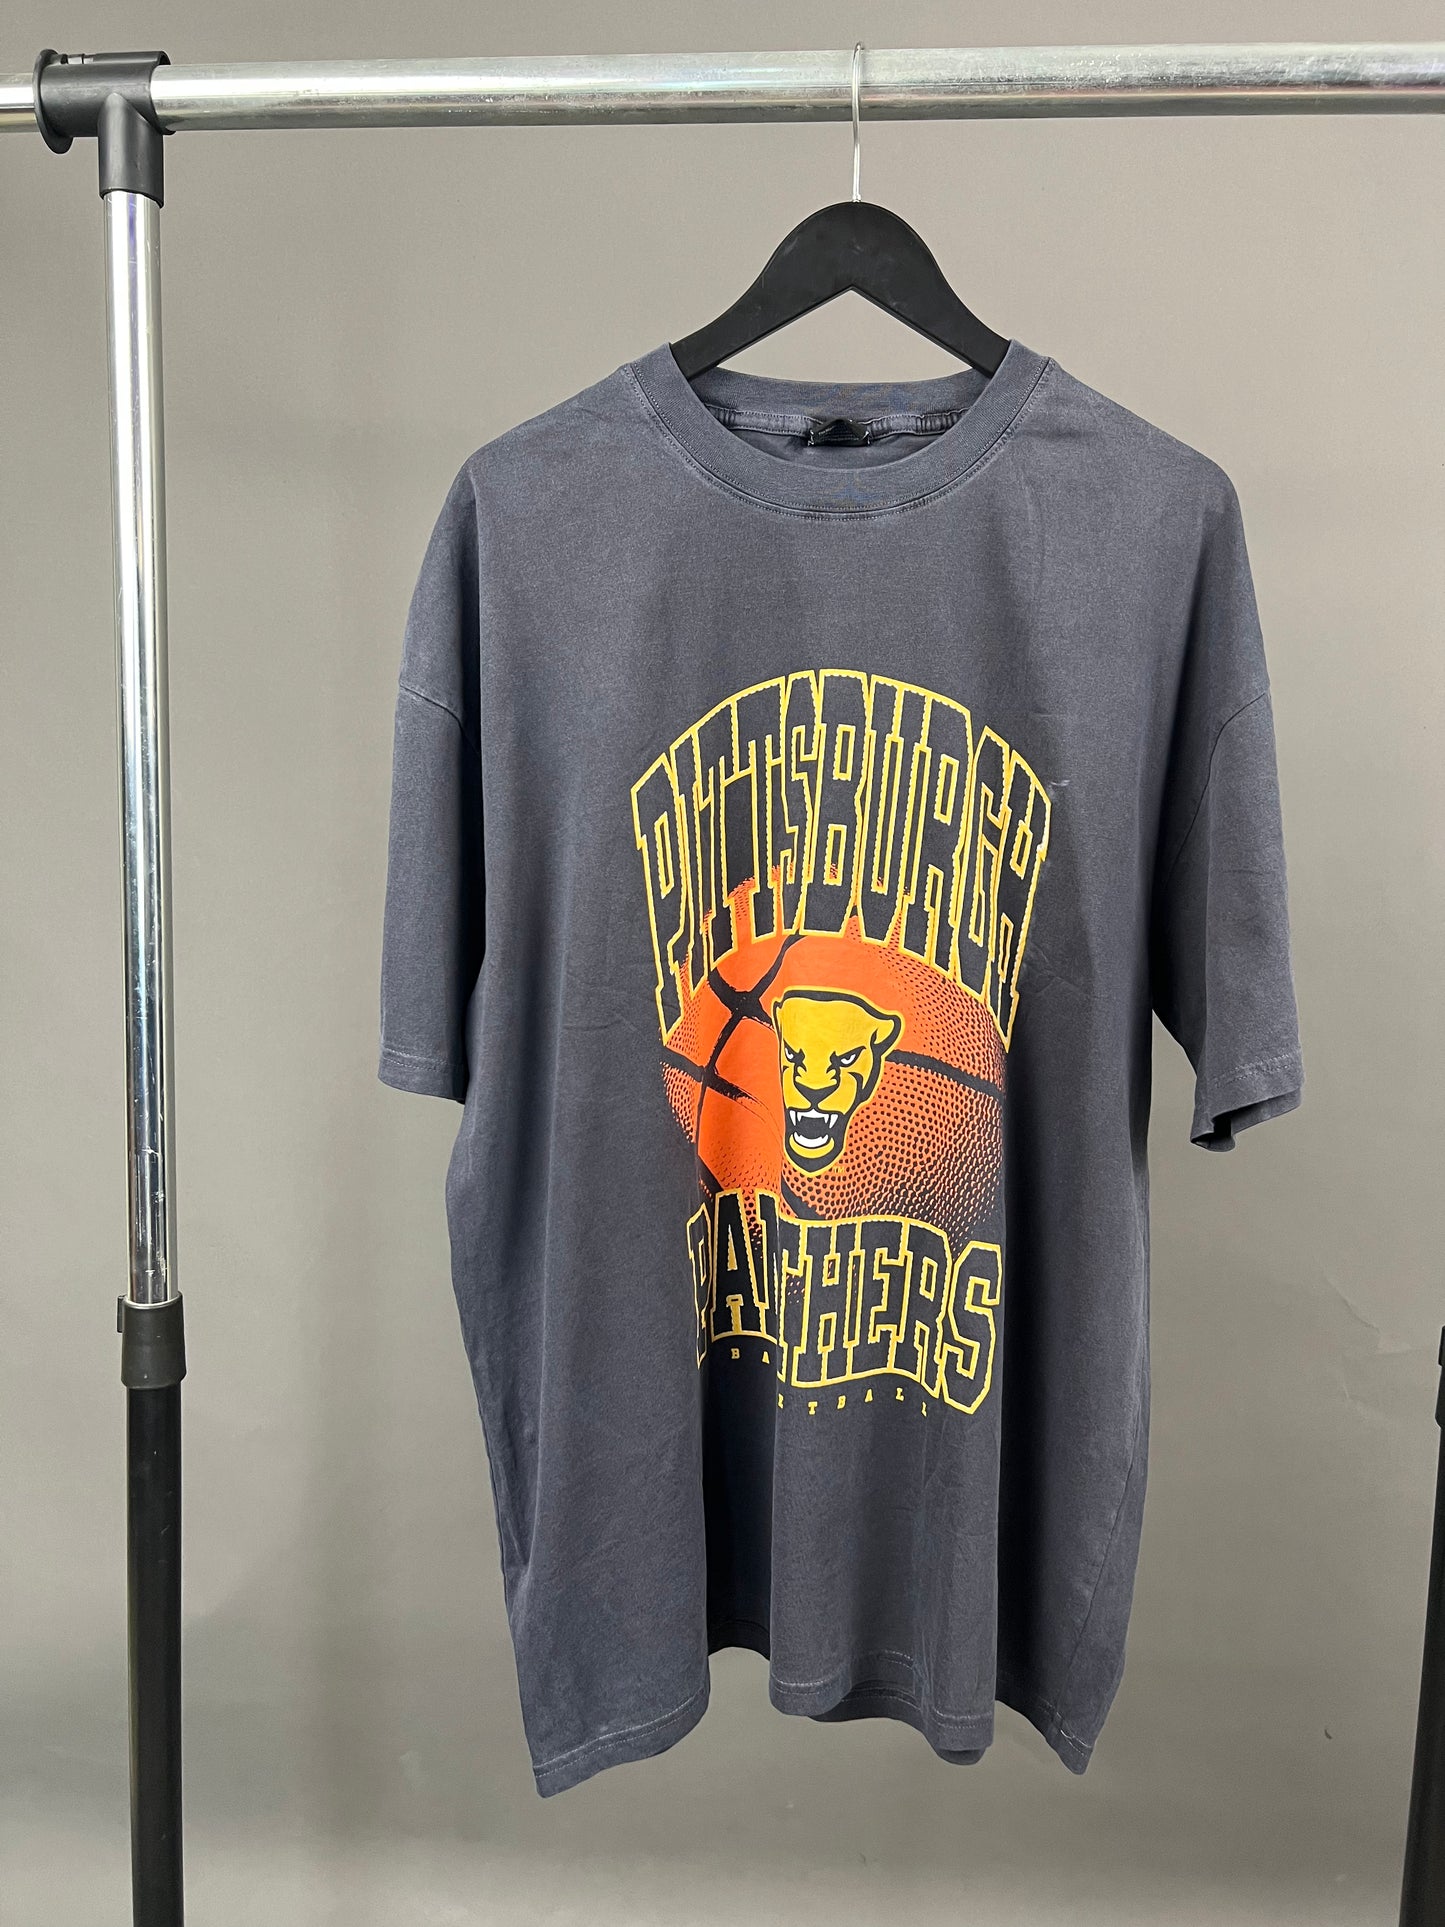 Pittsburgh Panthers Oversized T-shirt in gray